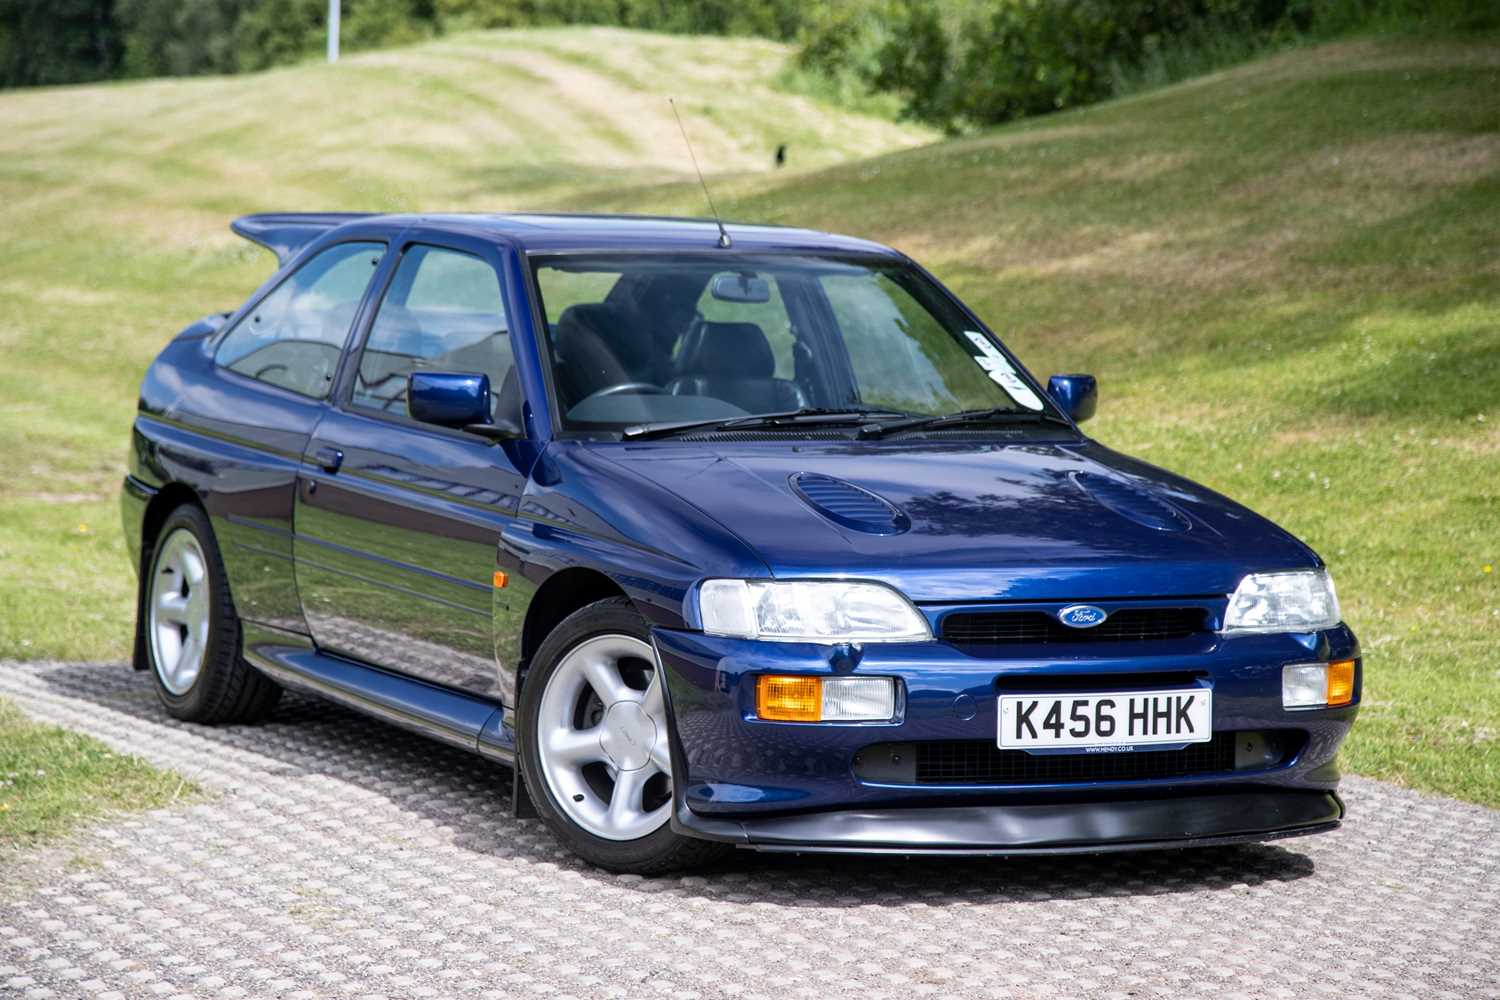 Lot 20 1992 Ford Escort RS Cosworth